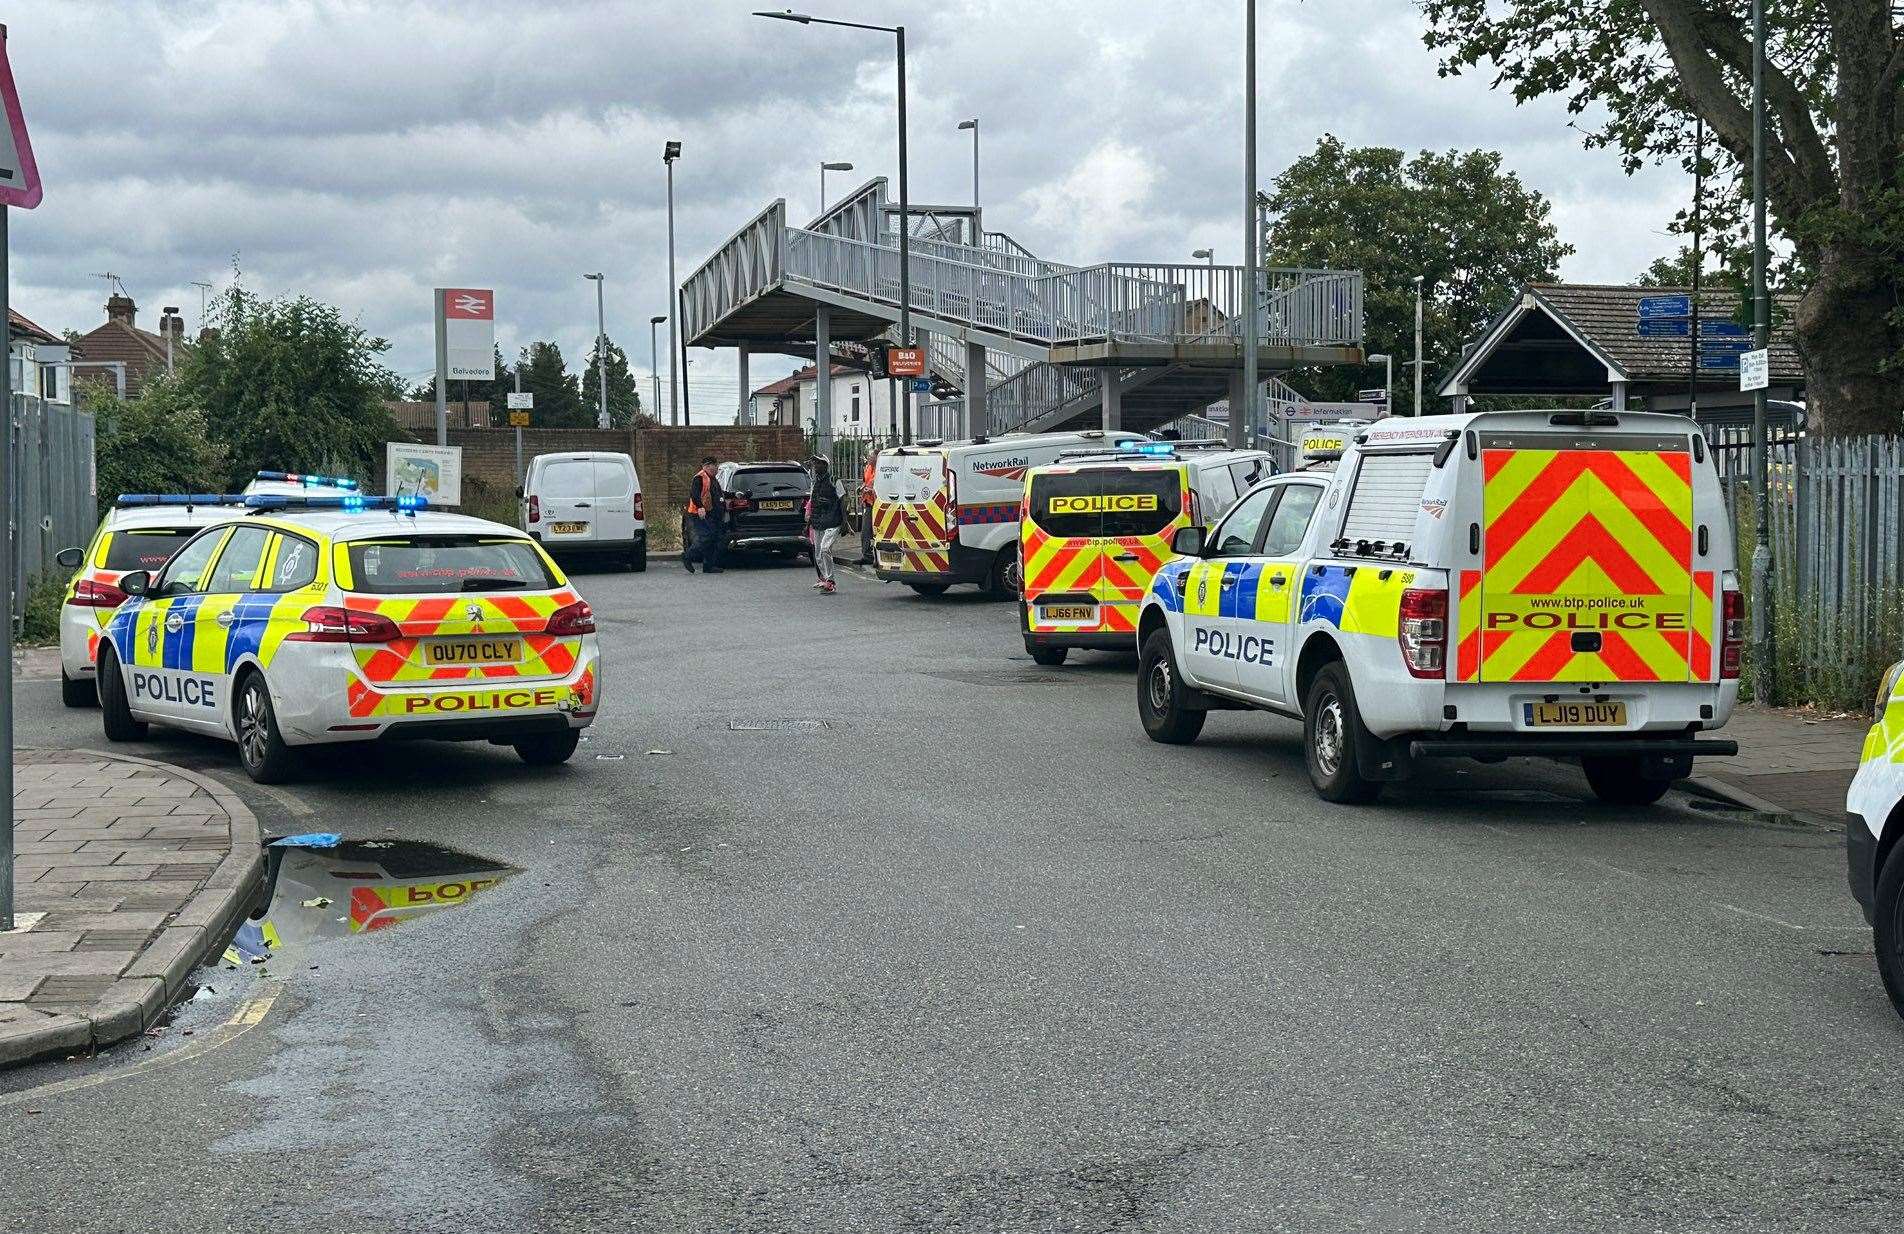 Emergency services responded after a person was hit by a train at Belvedere railway station. Picture: UKNIP